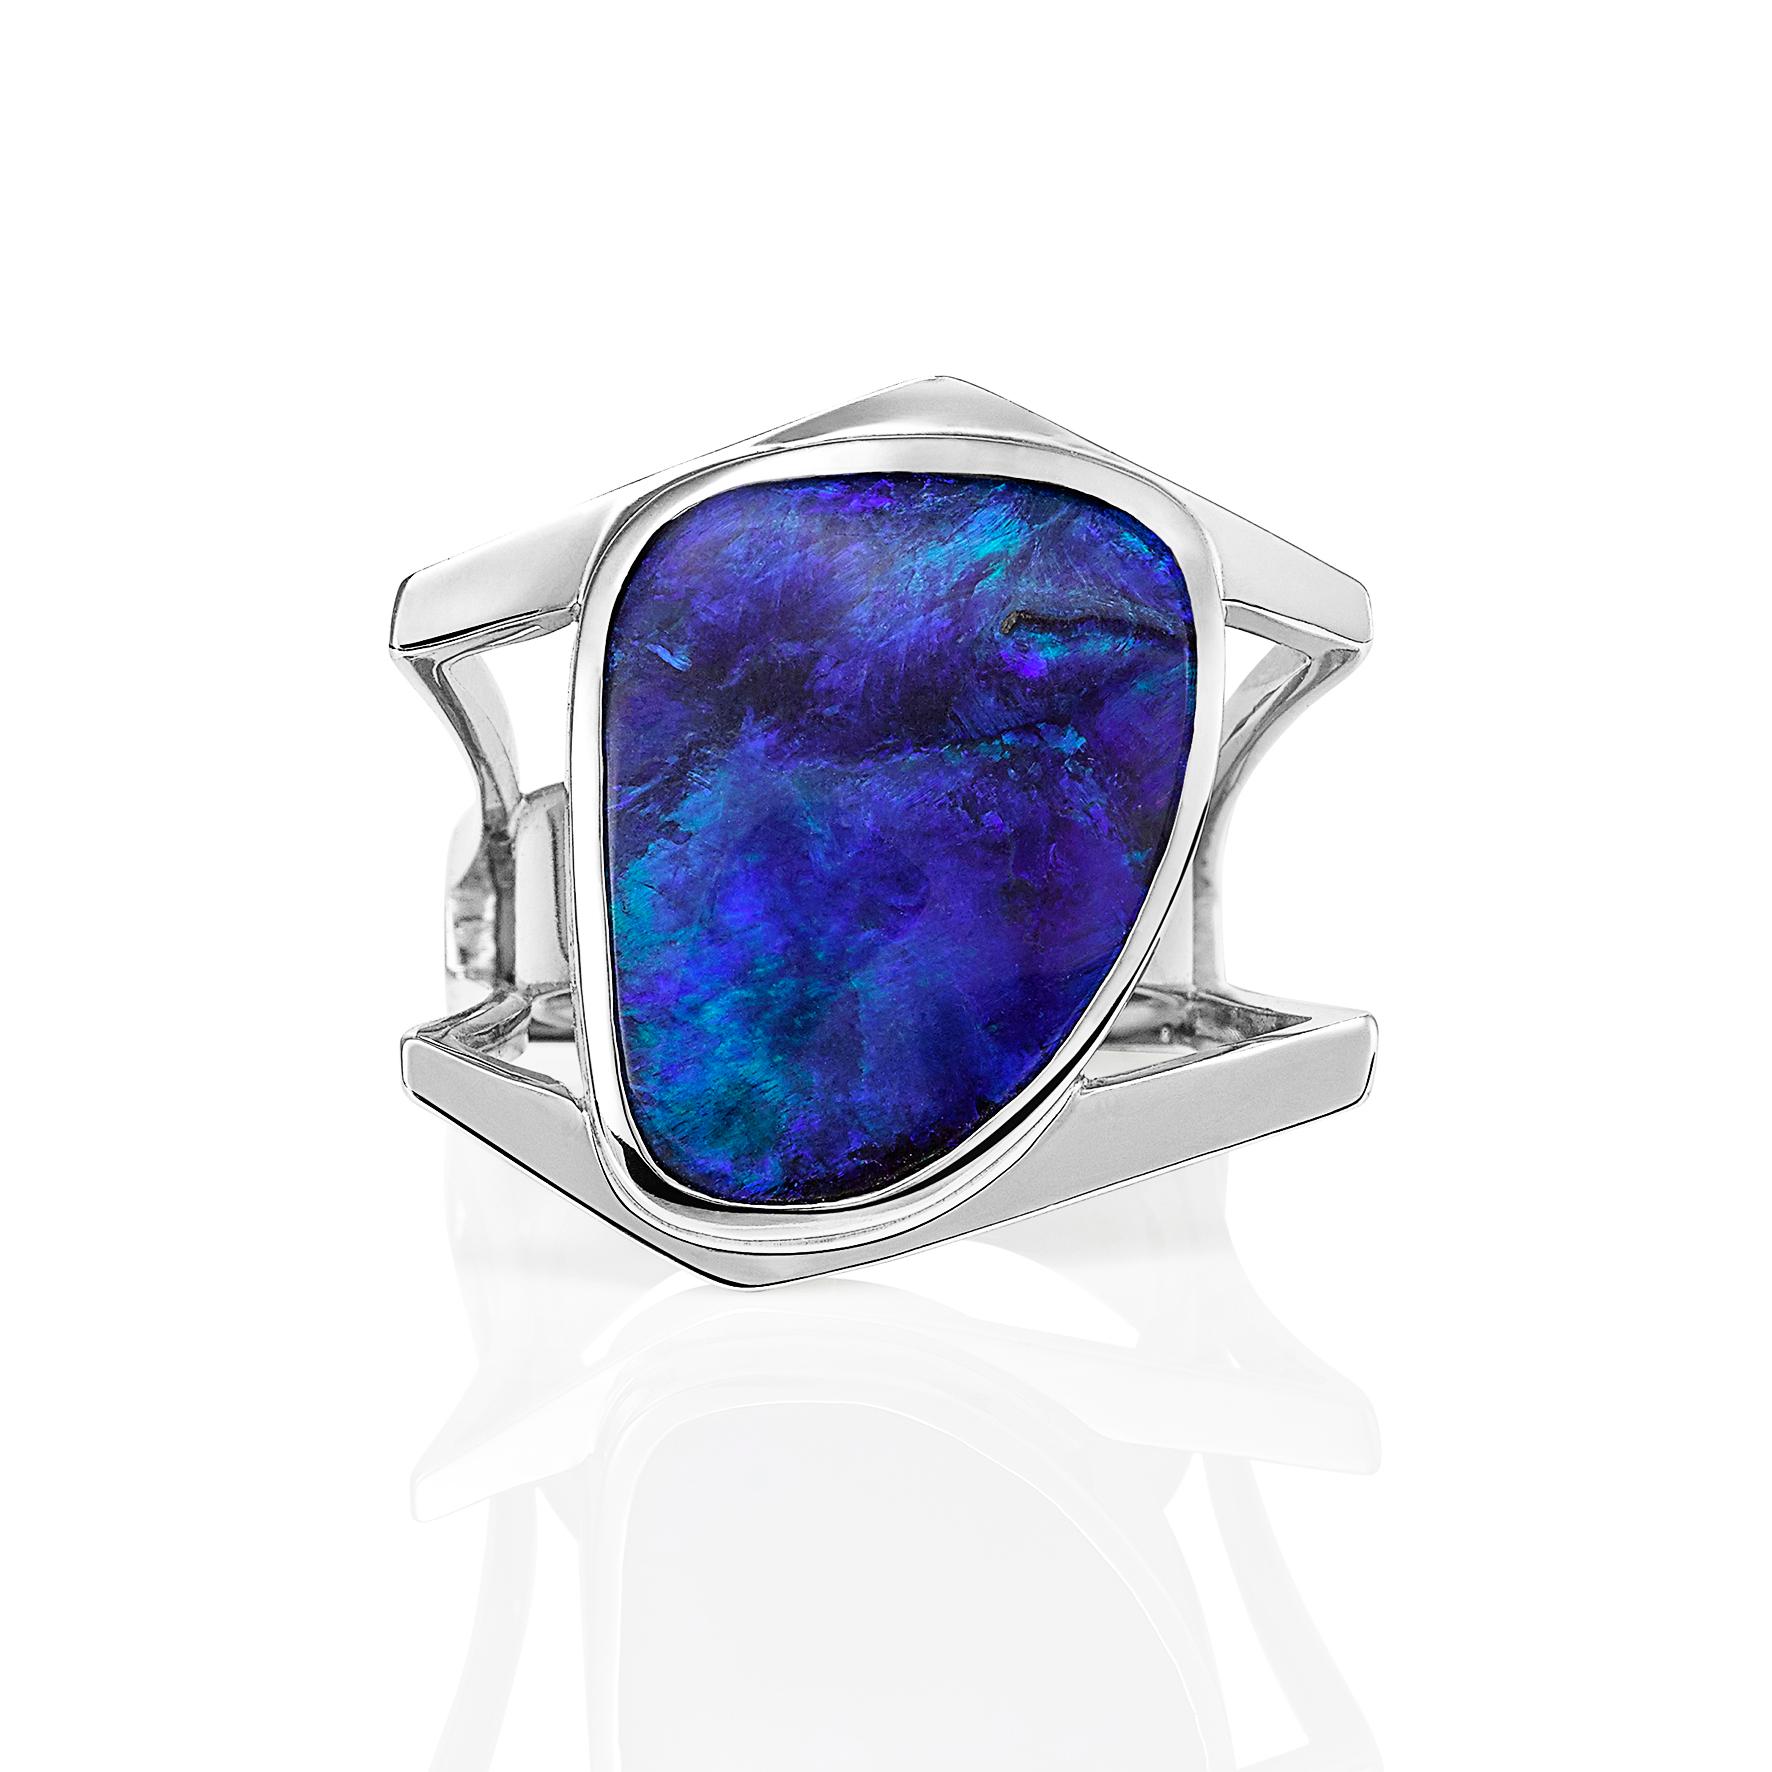 Giulians contemporary 18k 19.26ct Australian Boulder Opal Ring.  This cocktail ring showcases a natural solid boulder opal, from Queensland, with bight blue and green play-of-color.  The opal has been bezel set  within a handcrafted 18 karat white